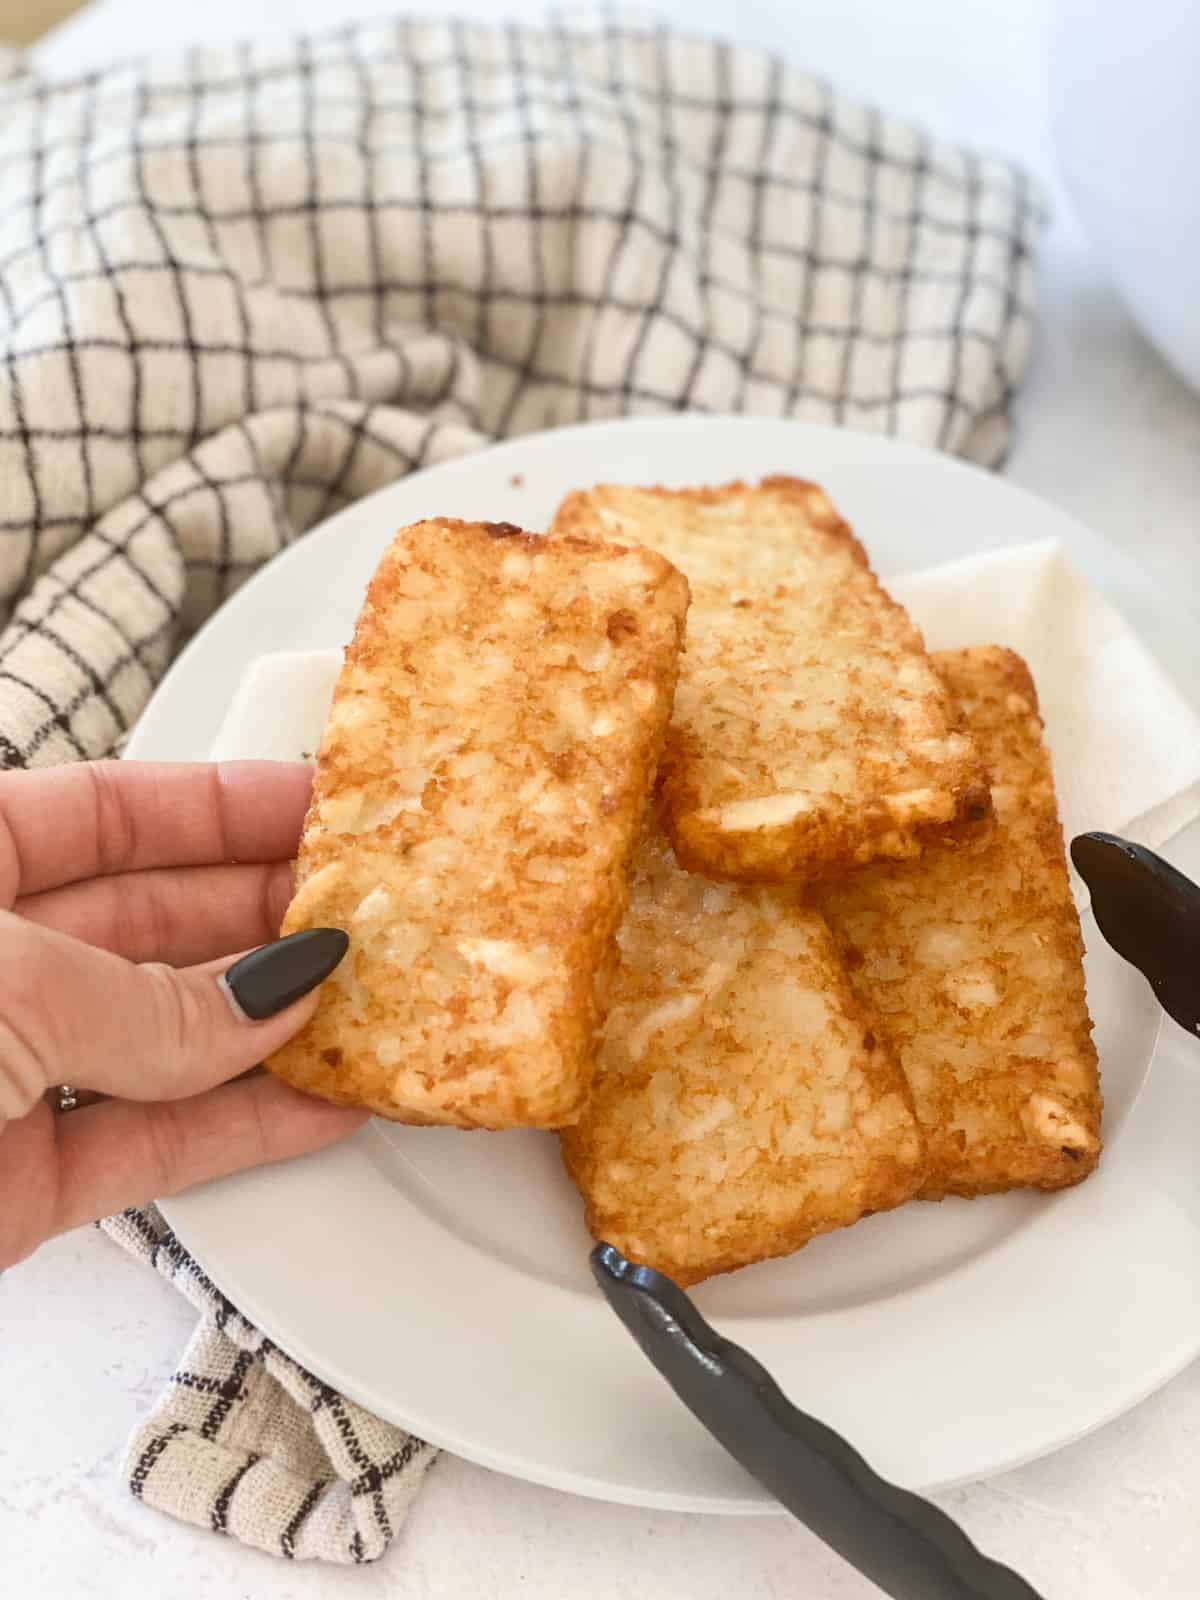 https://www.thisvivaciouslife.com/wp-content/uploads/2021/11/Hash-Browns-in-Air-Fryer1.jpg